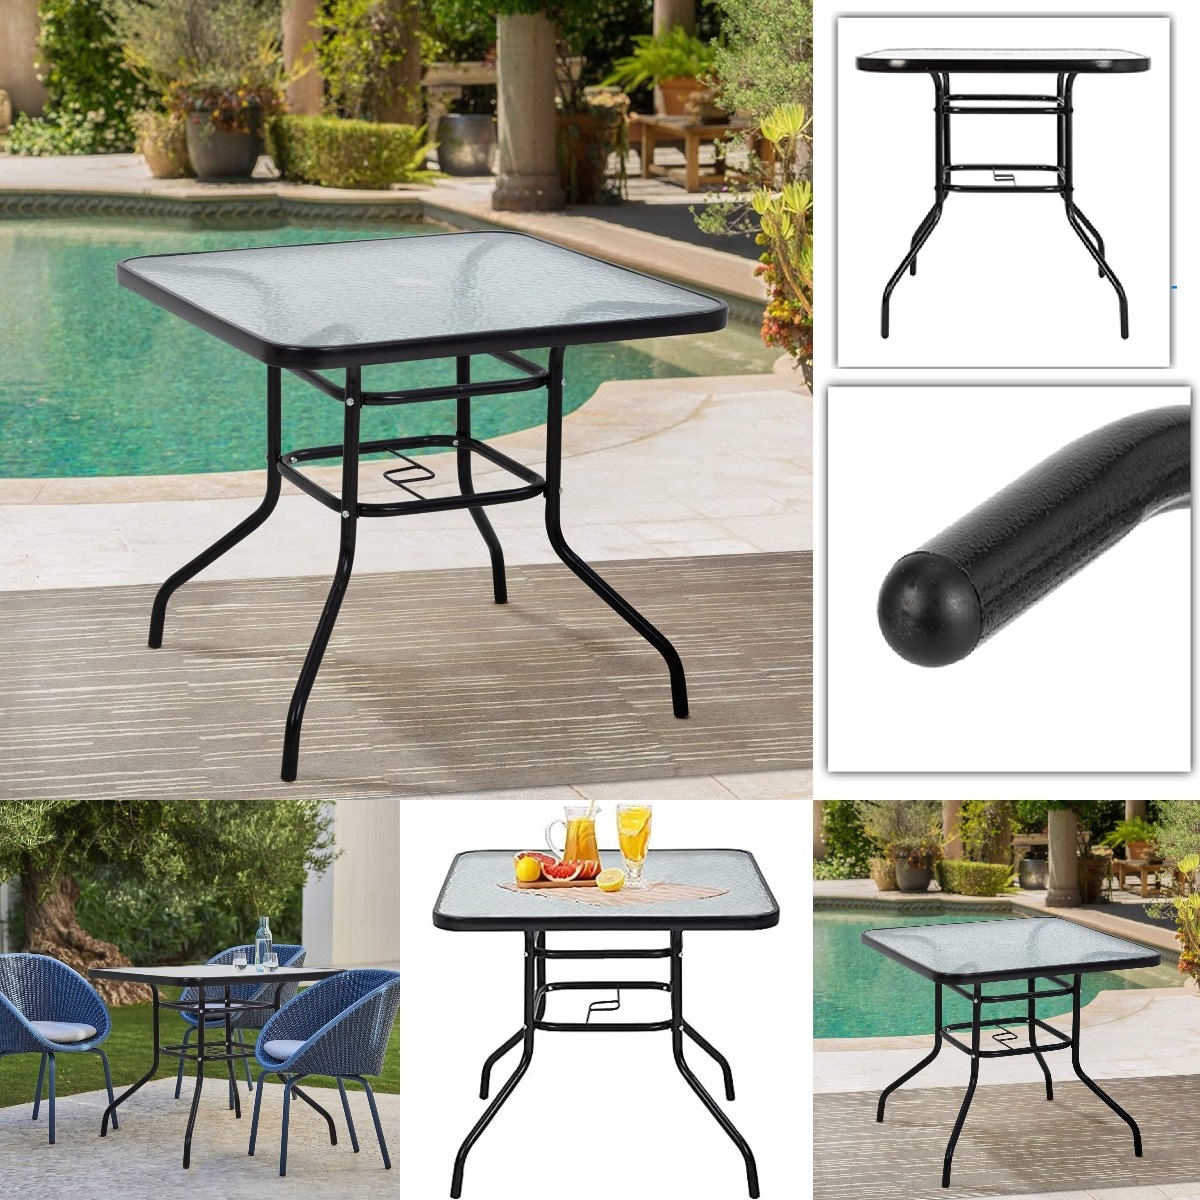 Goorabbit Outdoor Dining Table 31.5"Outdoor Bistro Table Square Patio Dining Table Side Table with Umbrella Hole, Outdoor Indoor Banquet Furniture with Metal Frame and Glass Top,Black - image 1 of 9